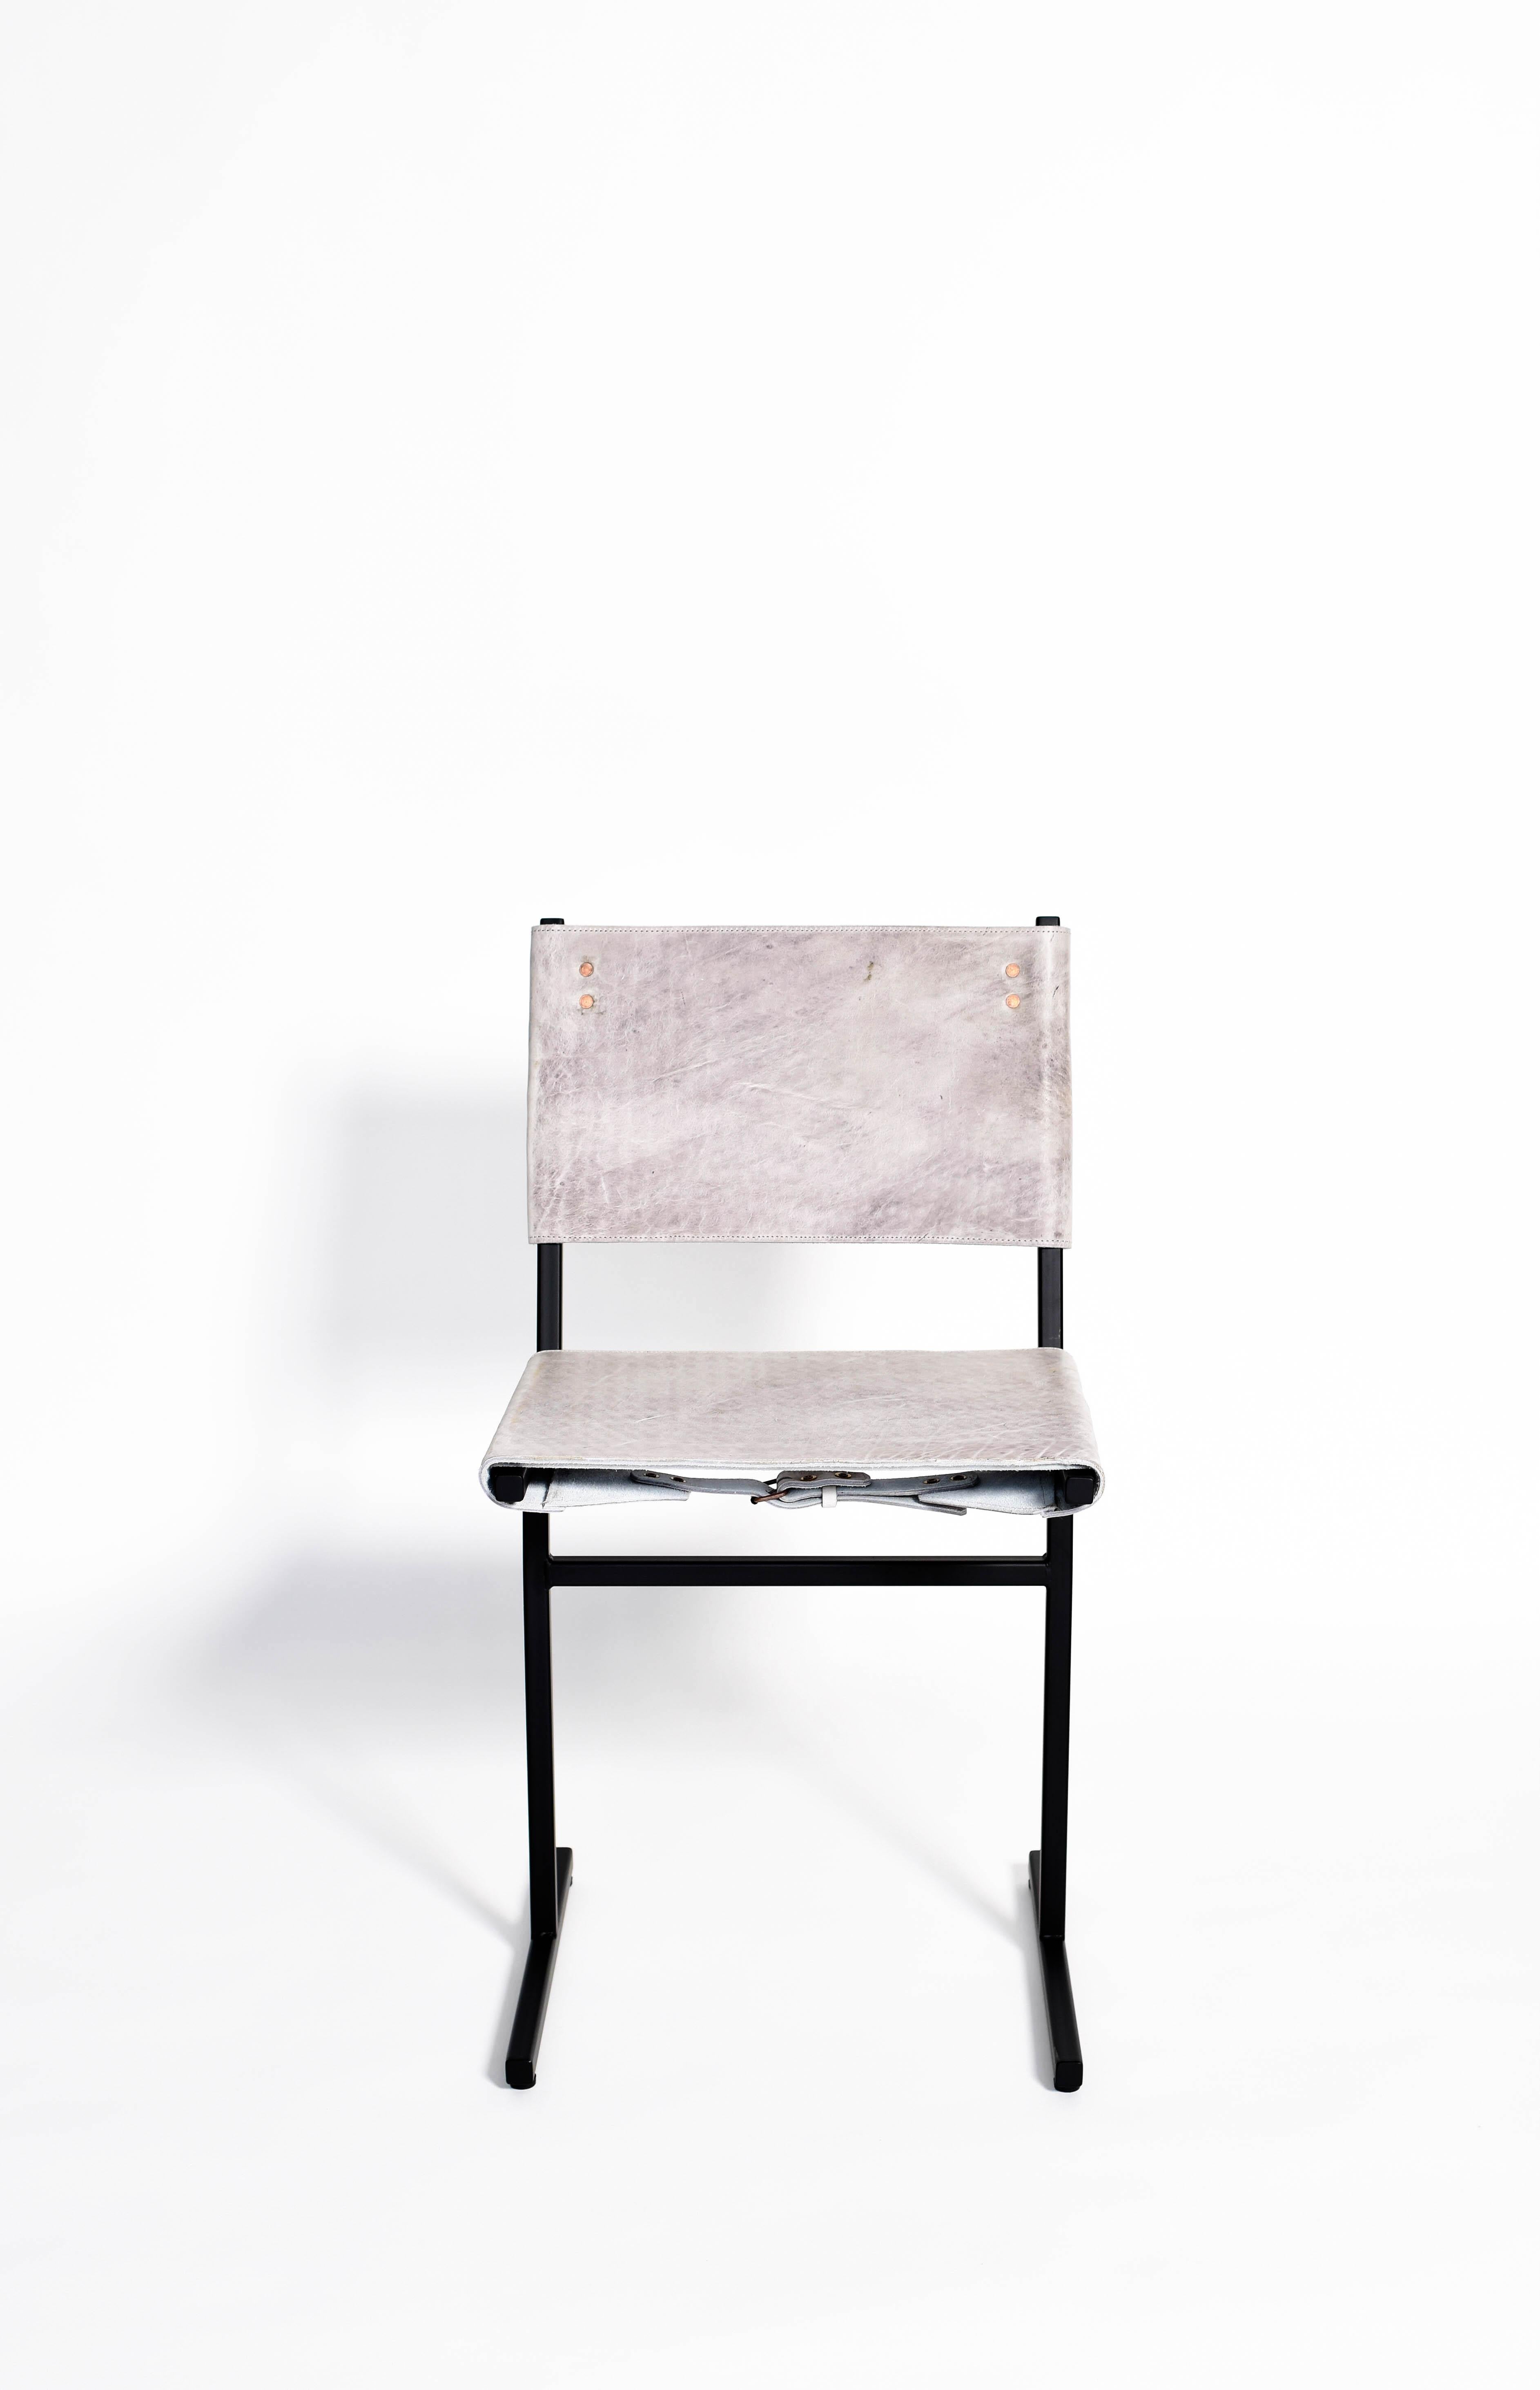 Grey and black Memento chair, Jesse Sanderson
Original signed chair by Jesse Sanderson
Materials: Leather, steel
Dimensions: W 43 x D 50 x H 80 cm 
 Seating height: 47 cm

Frame finishes available in brass, bare steel, matt black.

Five